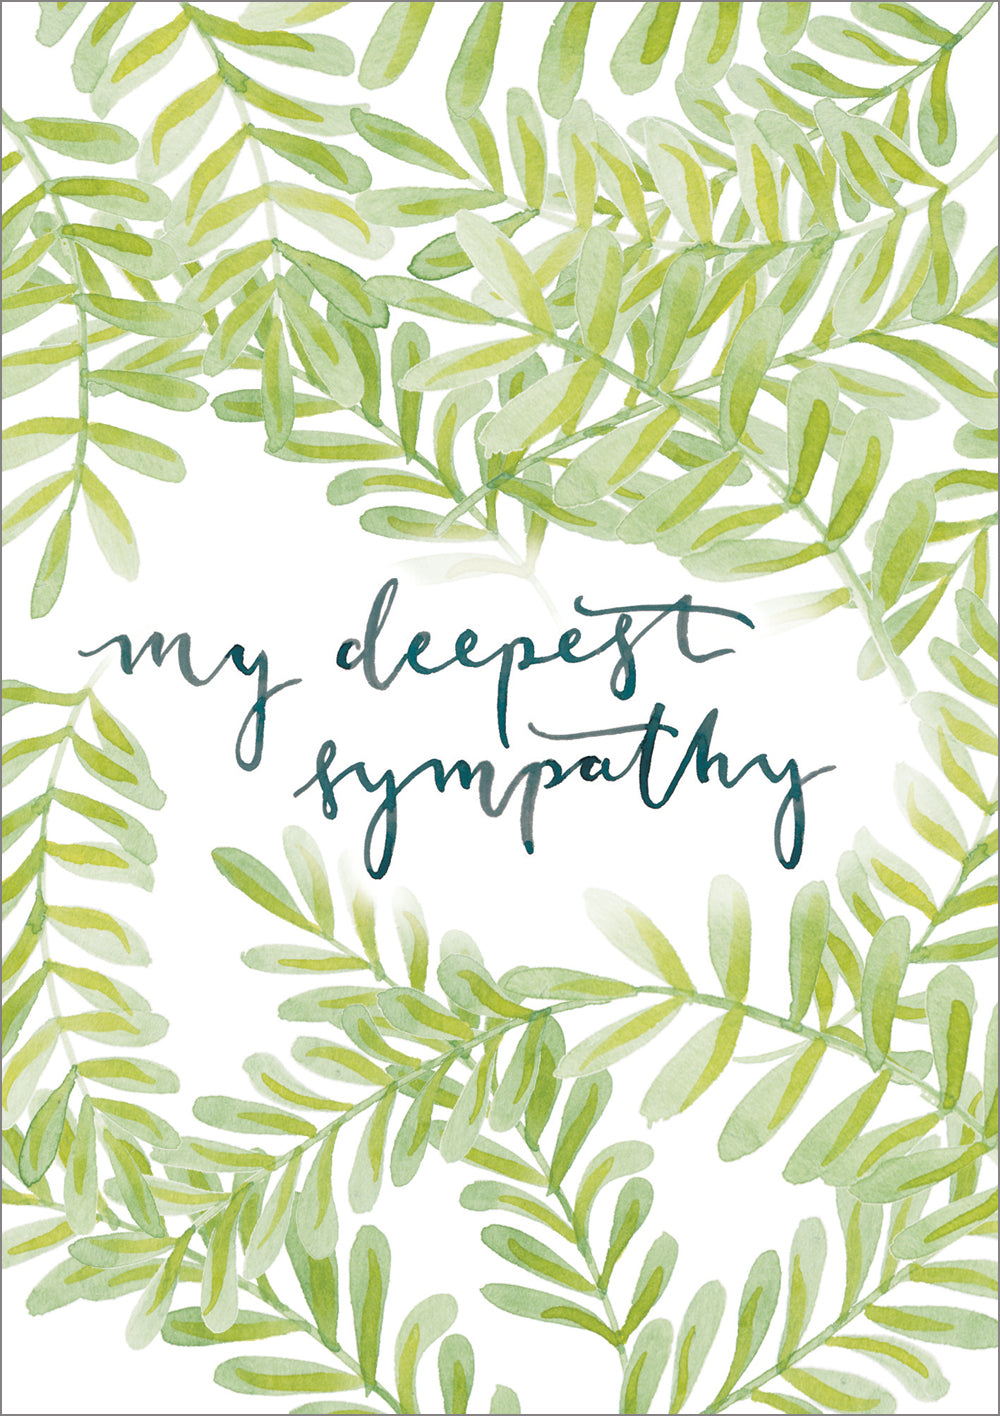 My Deepest Sympathies- Standard CardMy Deepest Sympathies- Standard Card